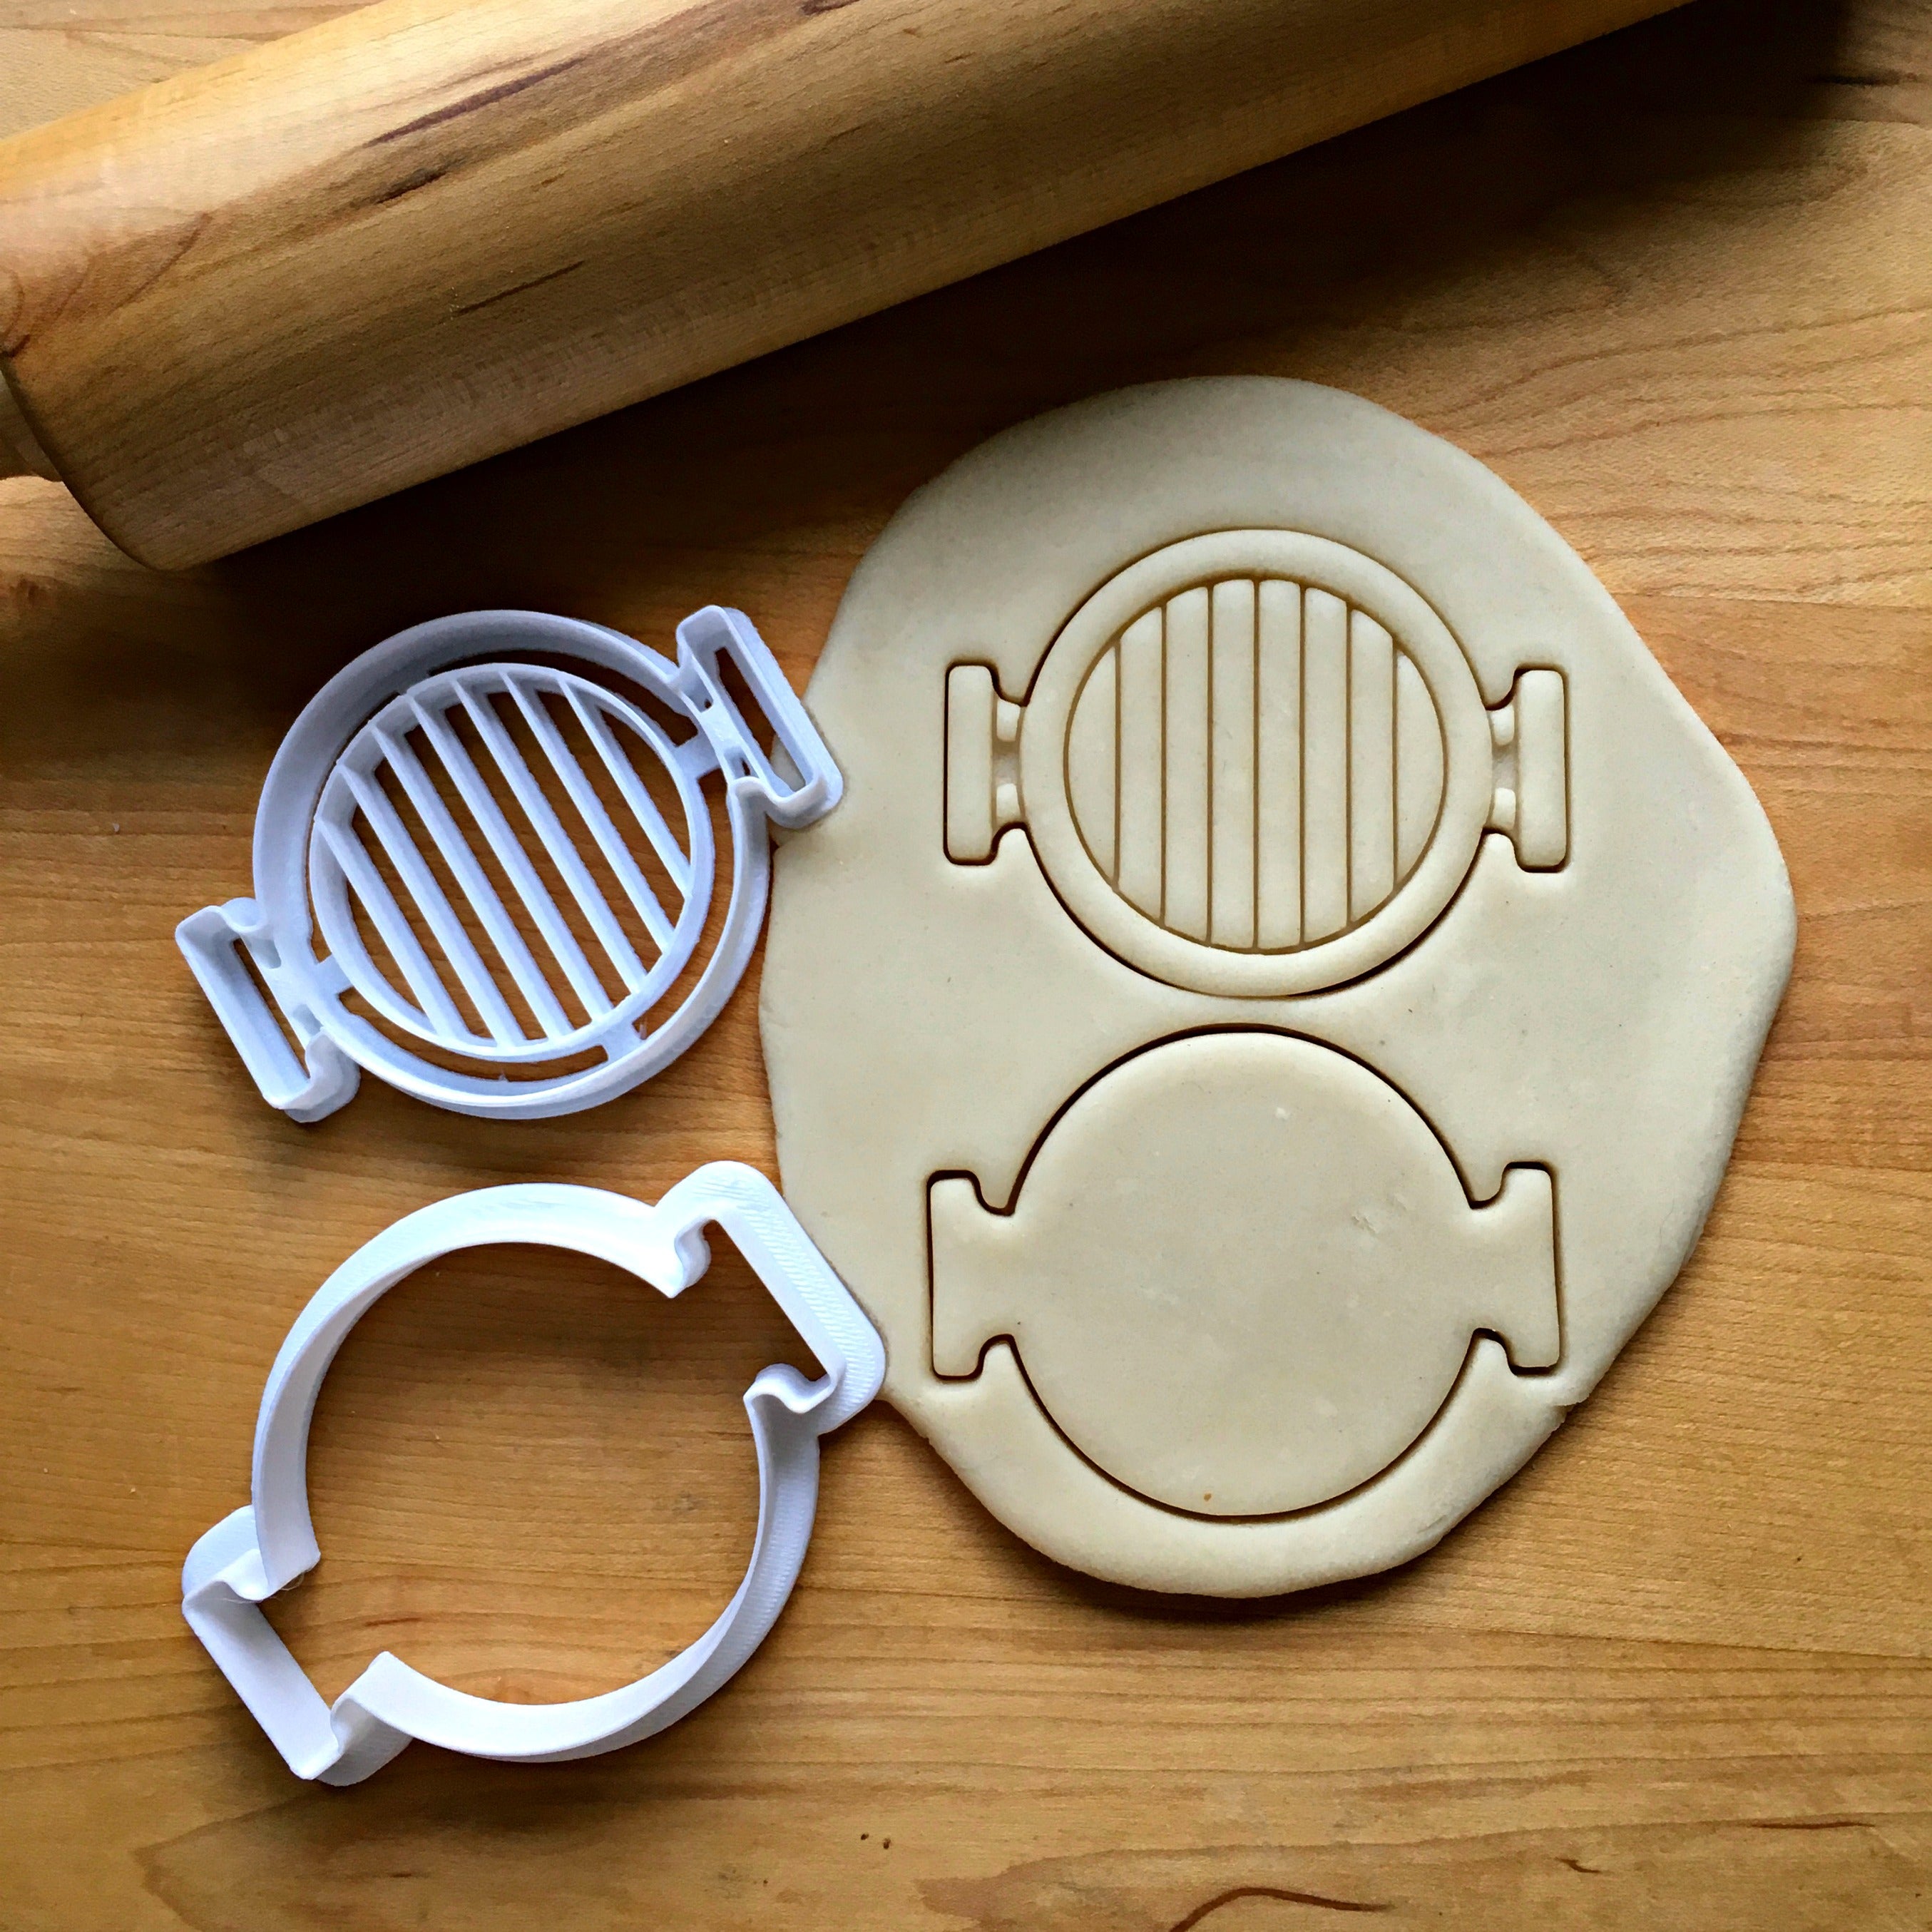 Set of 2 Grill Top Cookie Cutters/Dishwasher Safe